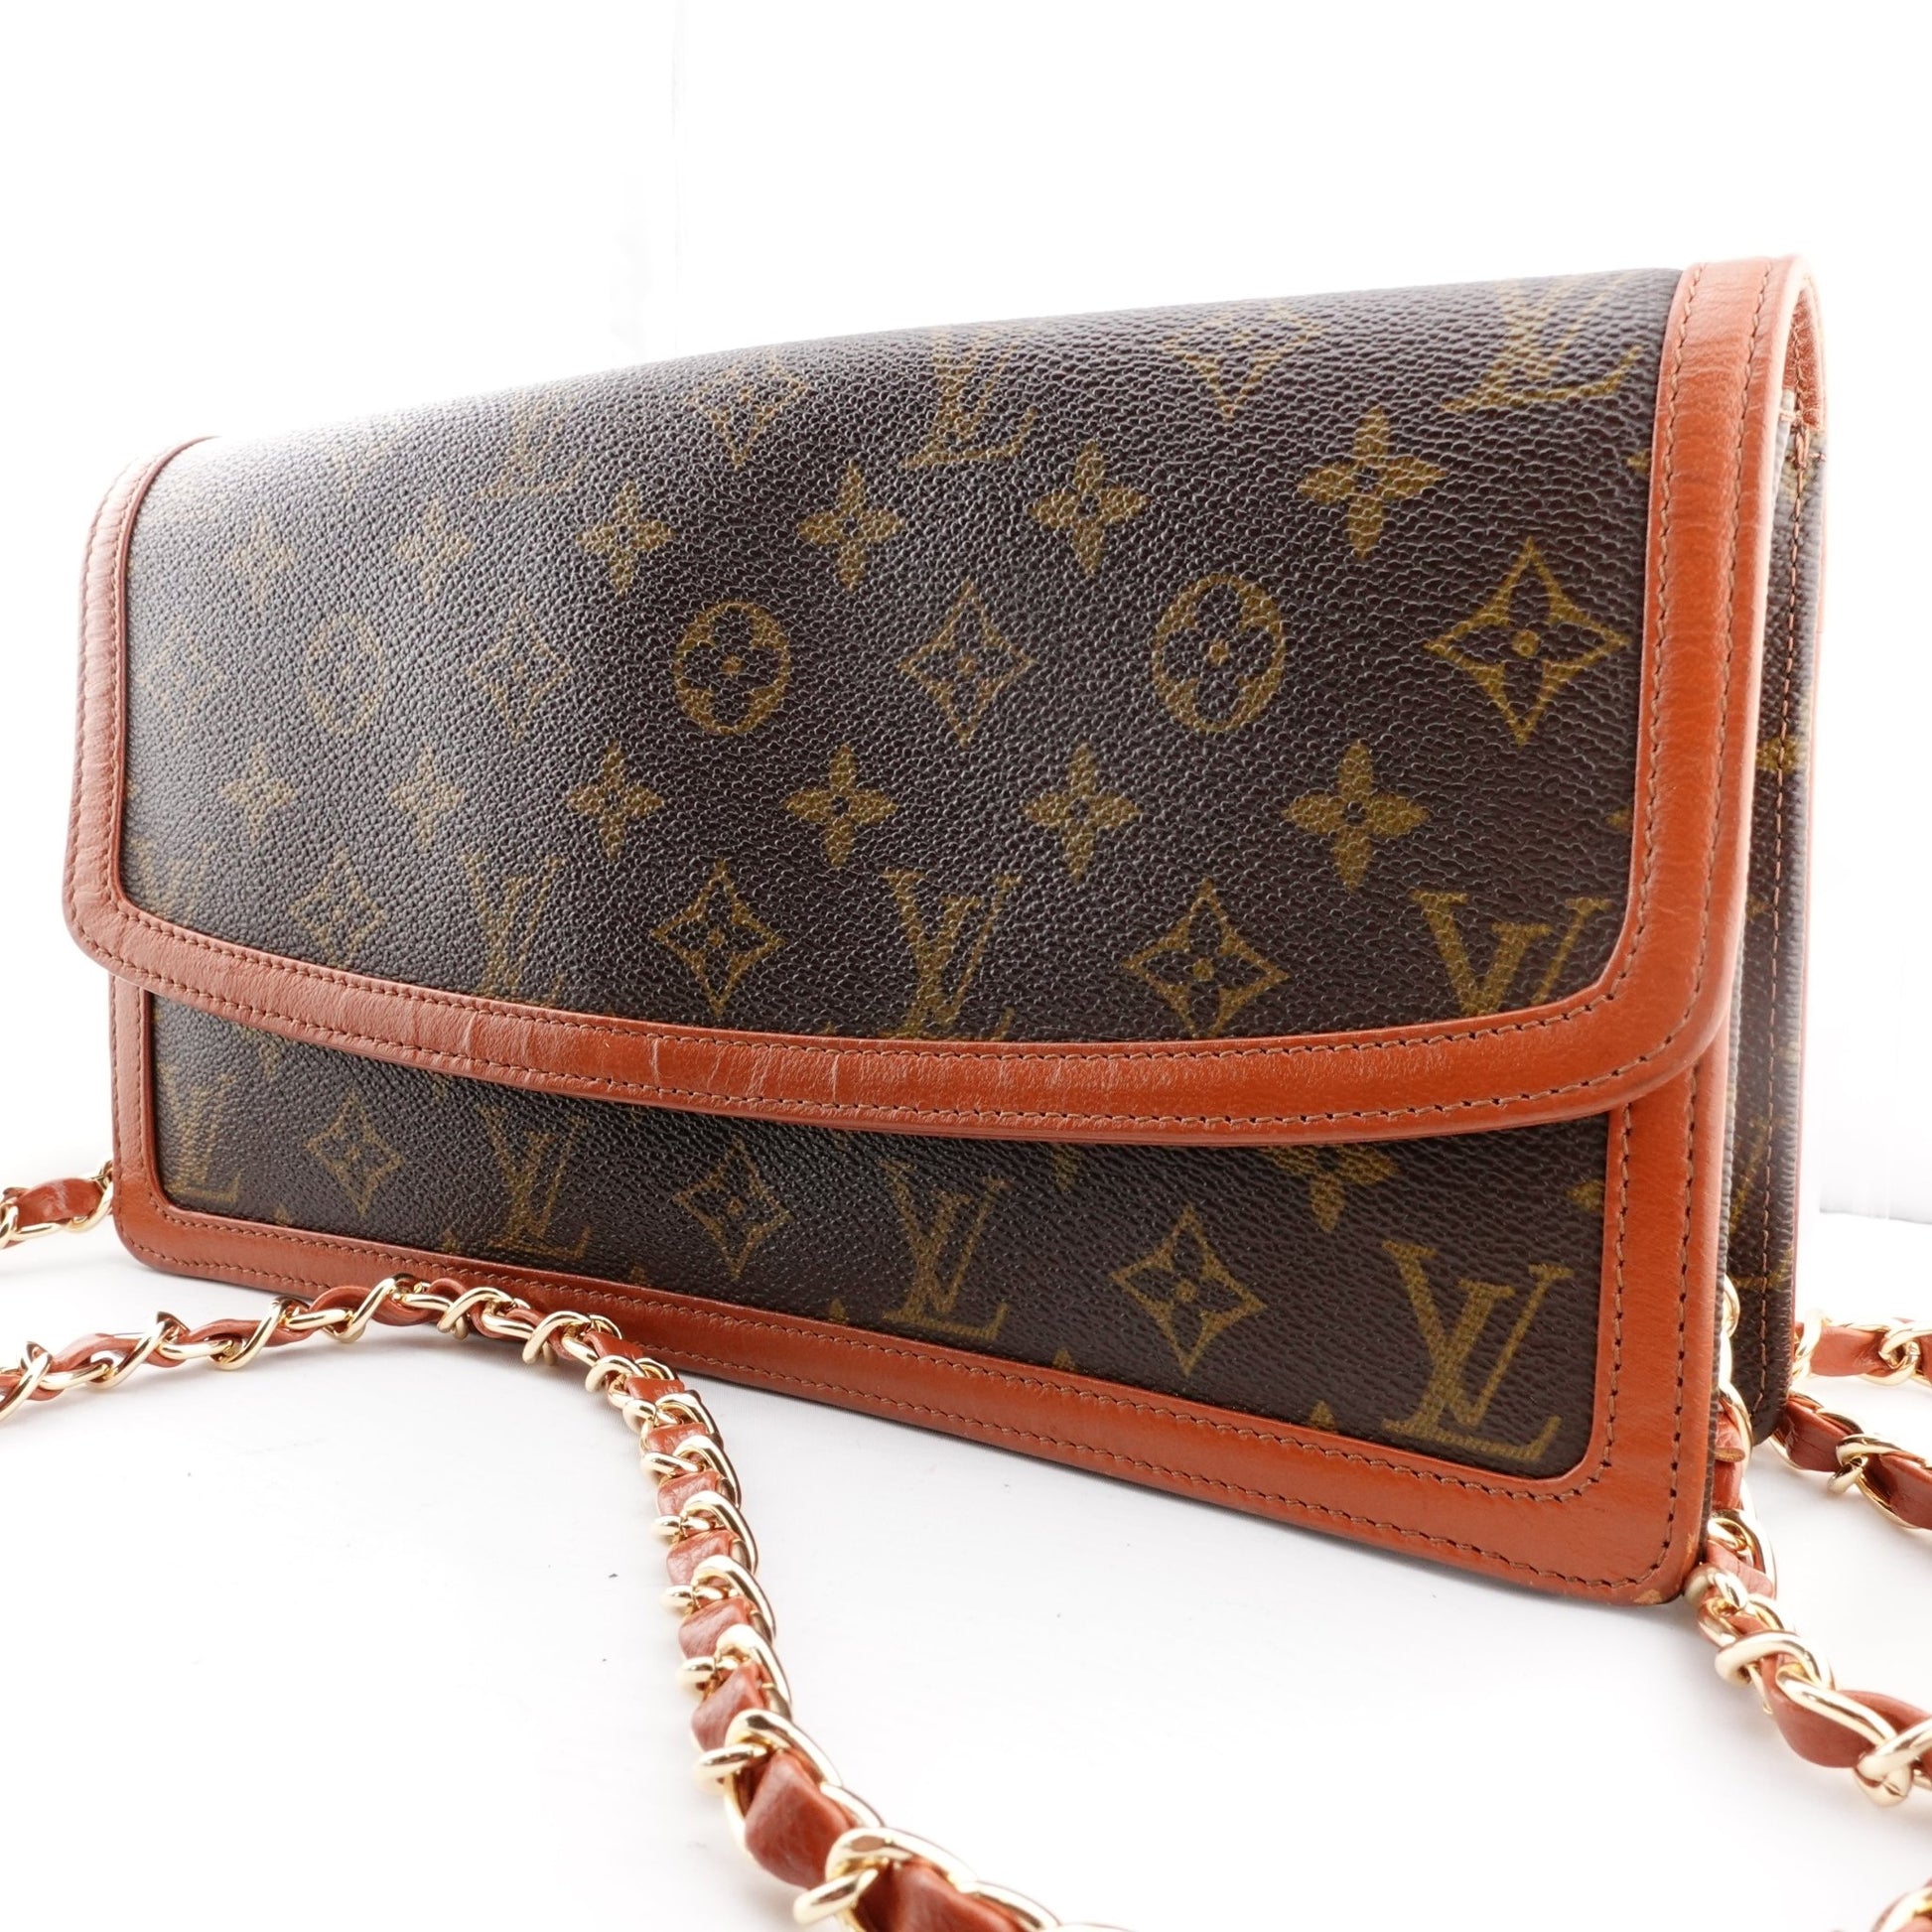 LOUIS VUITTON Monogram Dame GM with Leather Chain - Bag Envy